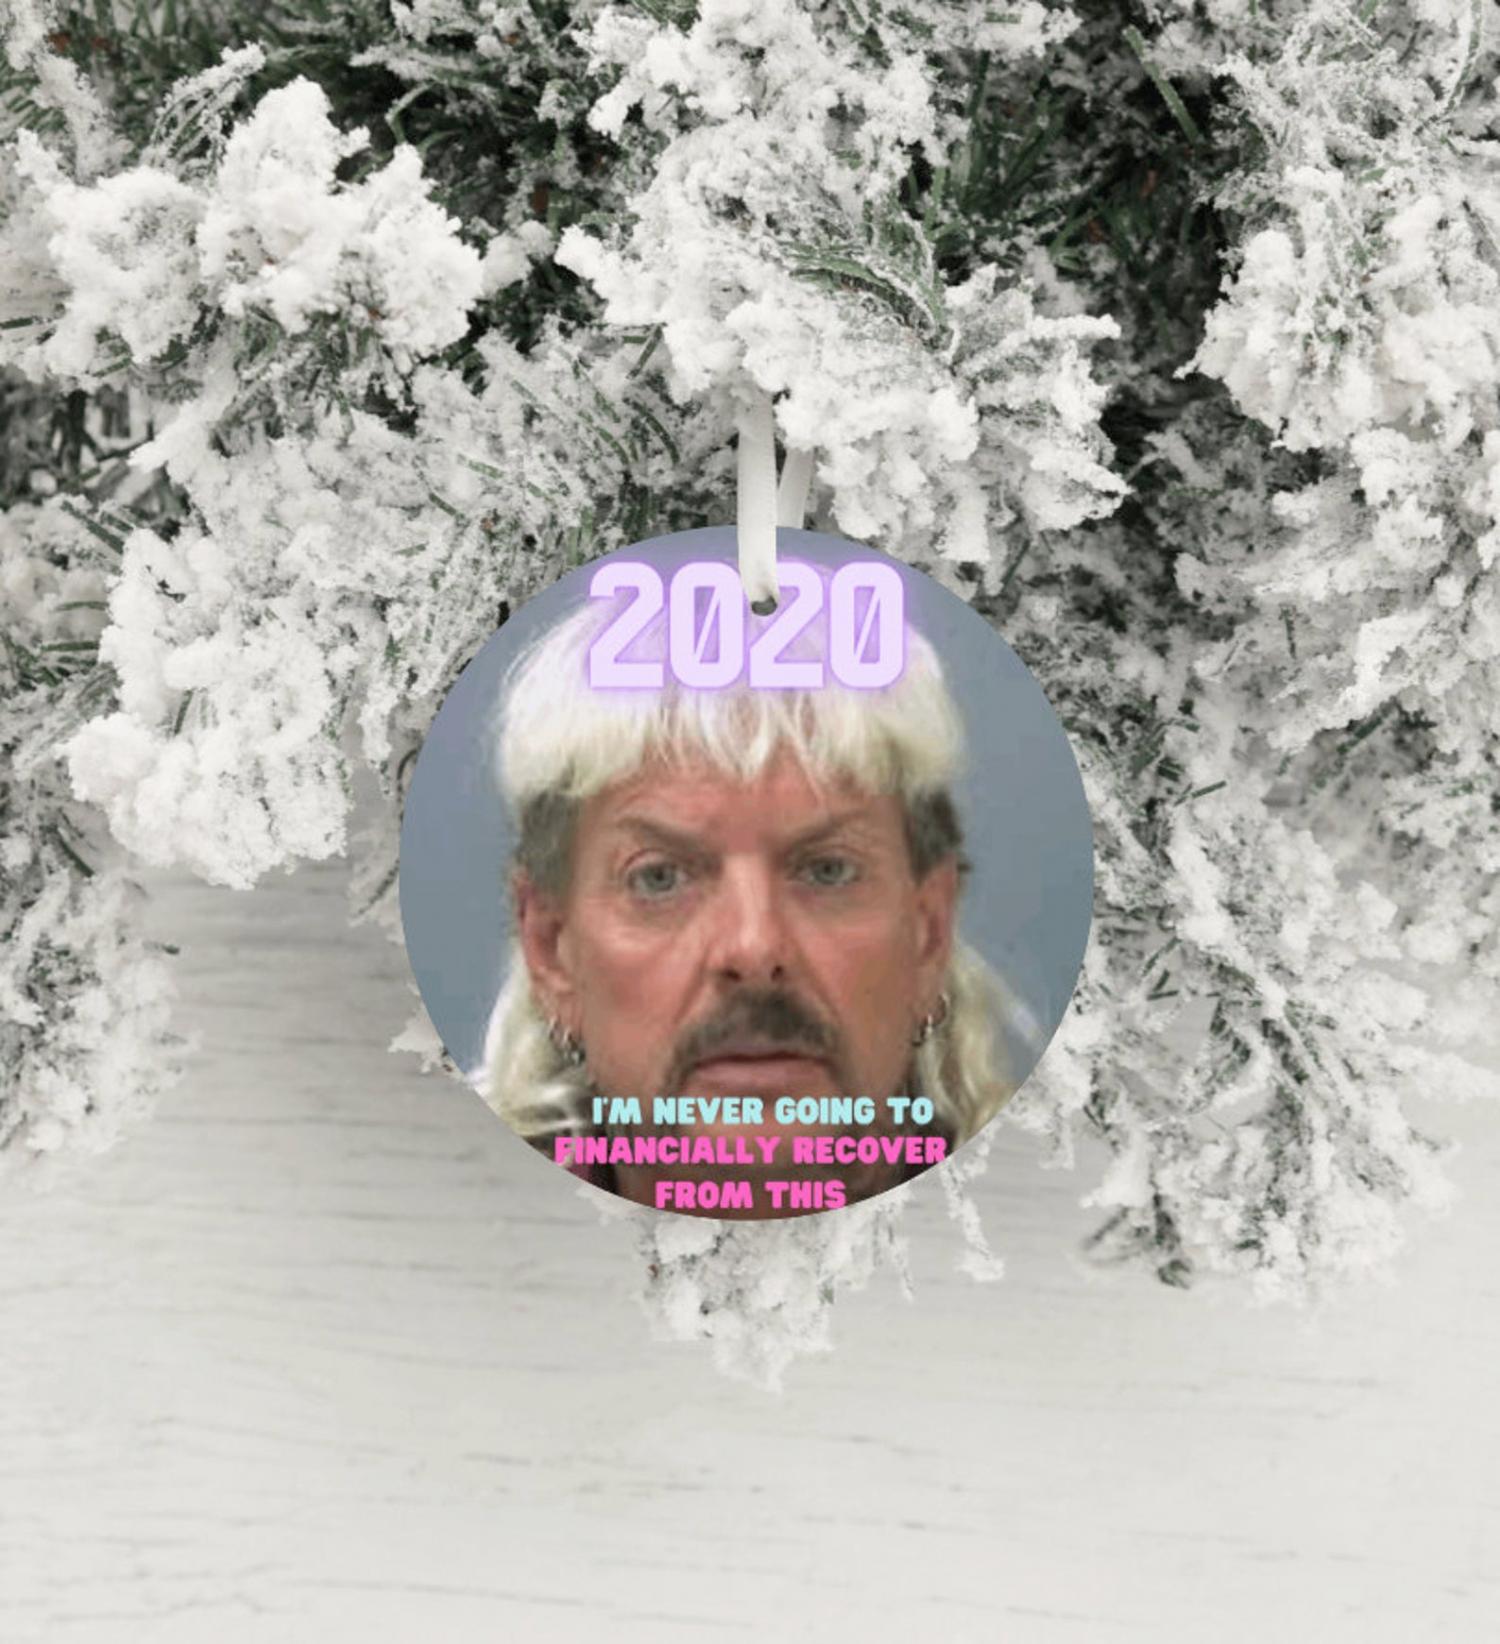 Joe Exotic Mug Shot Christmas Ornament - I am never going to financially recover from this